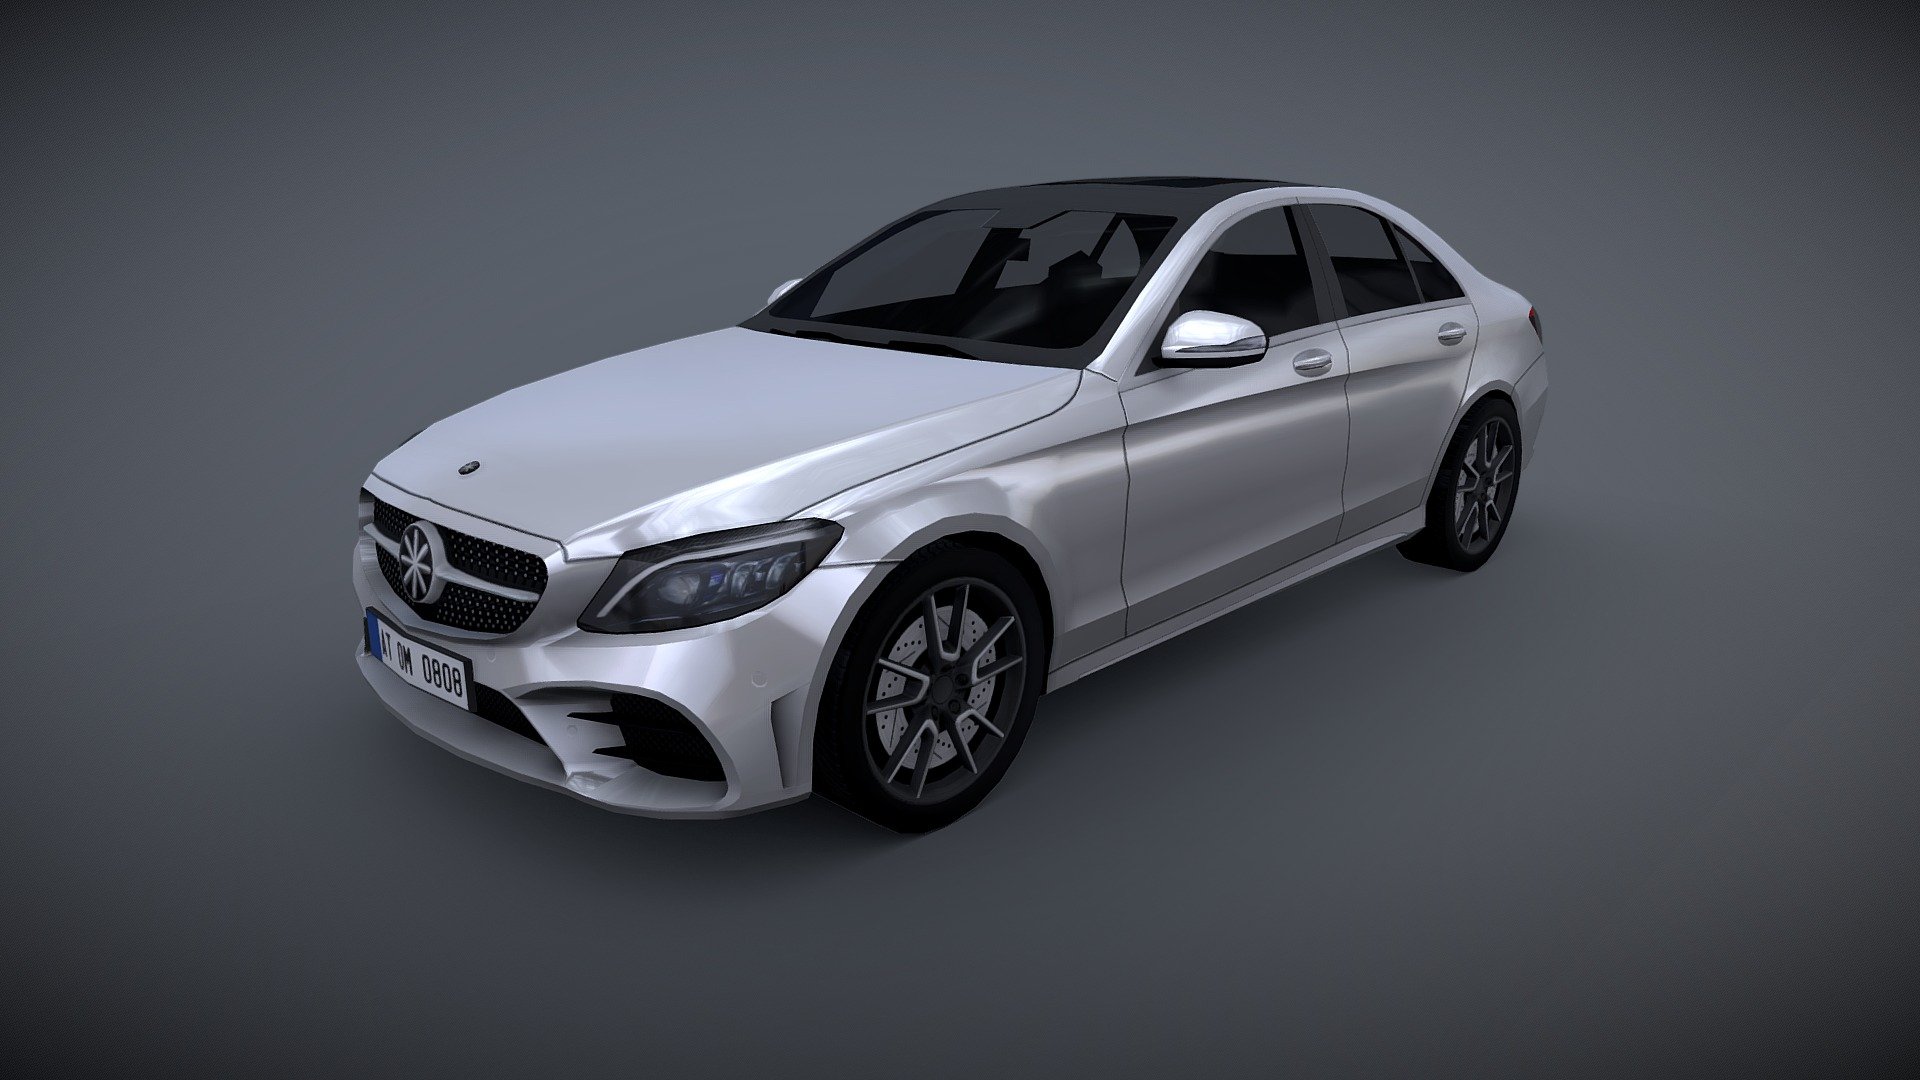 Mobile model of an Mercedes Benz C - Class 2019

Generic Badges.
Polycount limited to 8000 triangles per whole car, 400 triangles per wheel.
2k texture for Diffuse, Normal, Specular and Gloss 3d model